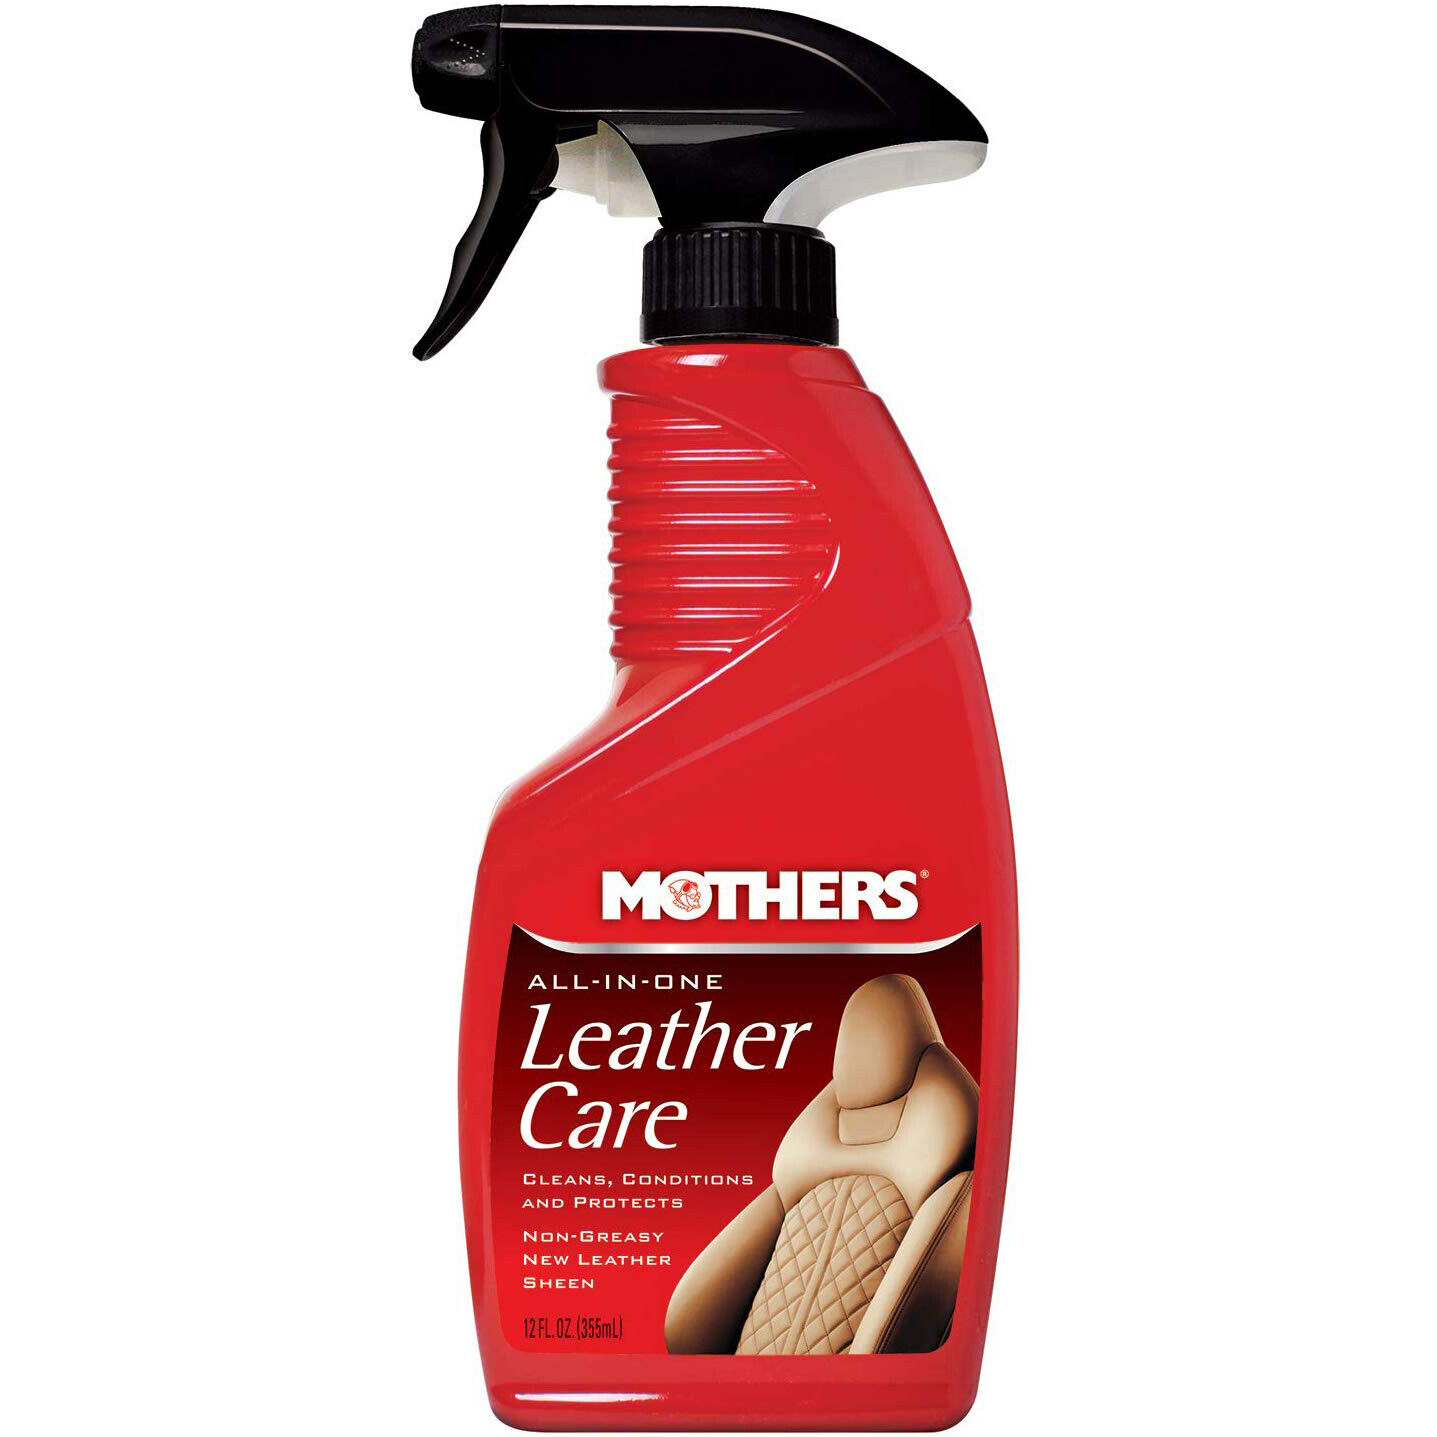 Mothers 06512 All-in-One Leather Care, 12 fl. oz.